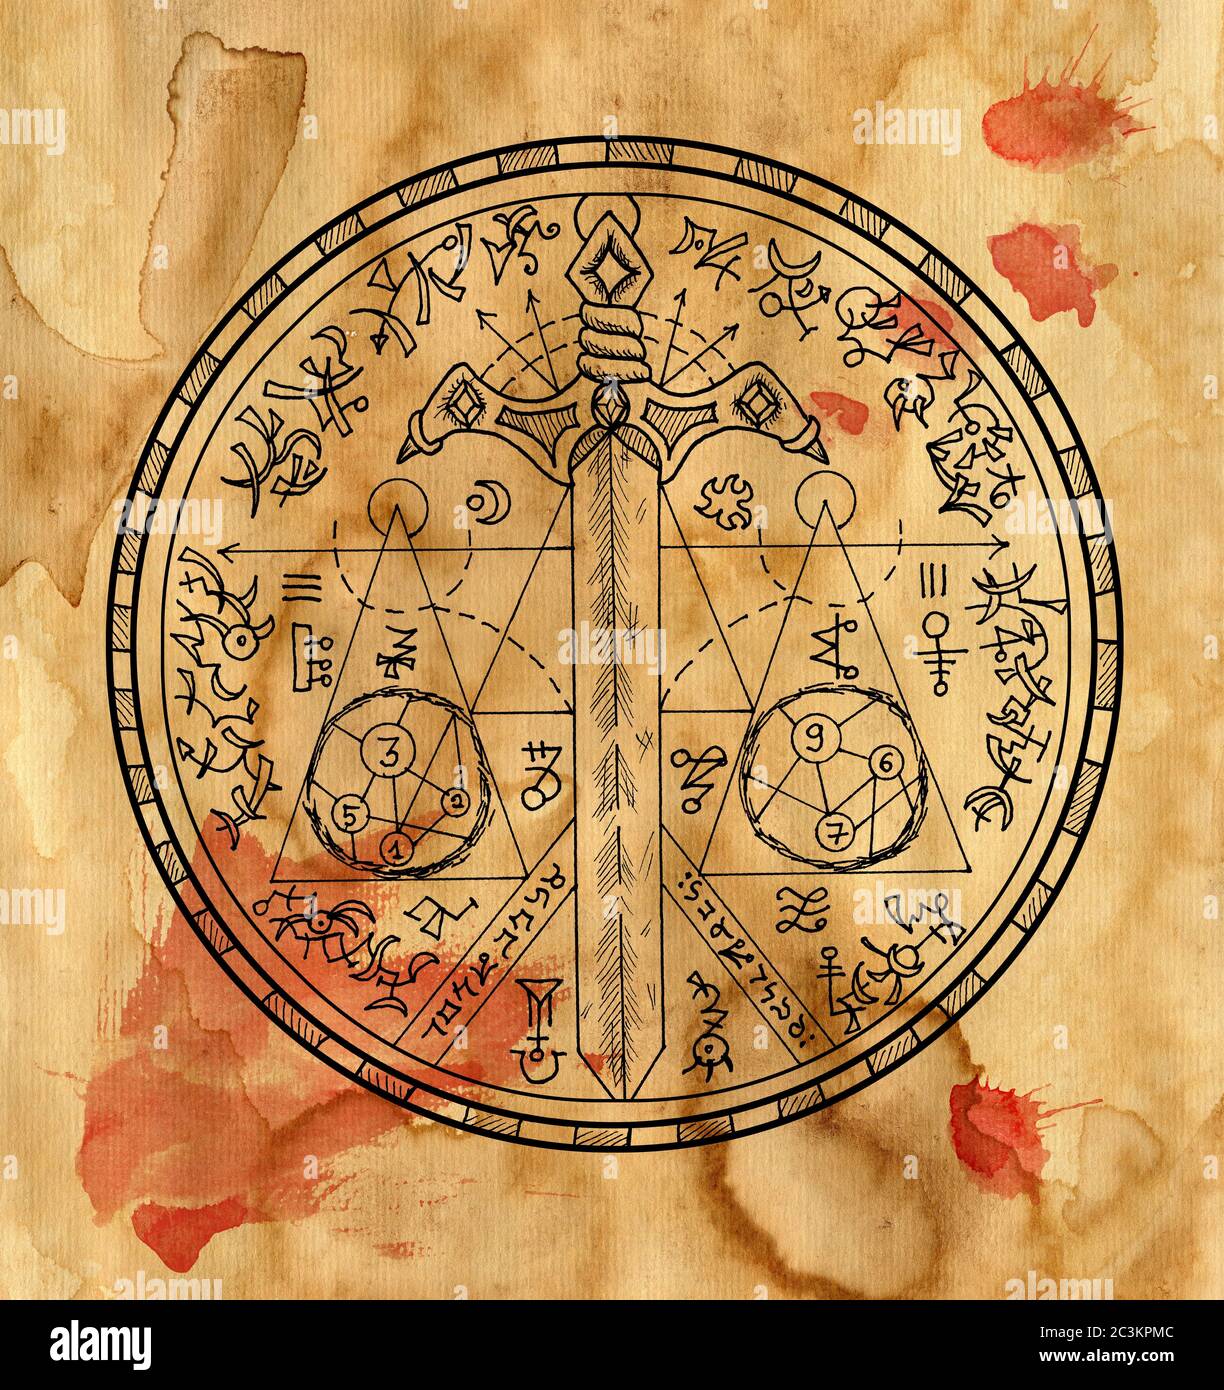 https://c8.alamy.com/comp/2C3KPMC/mystic-background-with-fantasy-sword-in-magic-seal-pentacle-on-old-paper-texture-manuscript-halloween-illustration-with-esoteric-occult-and-gothic-2C3KPMC.jpg